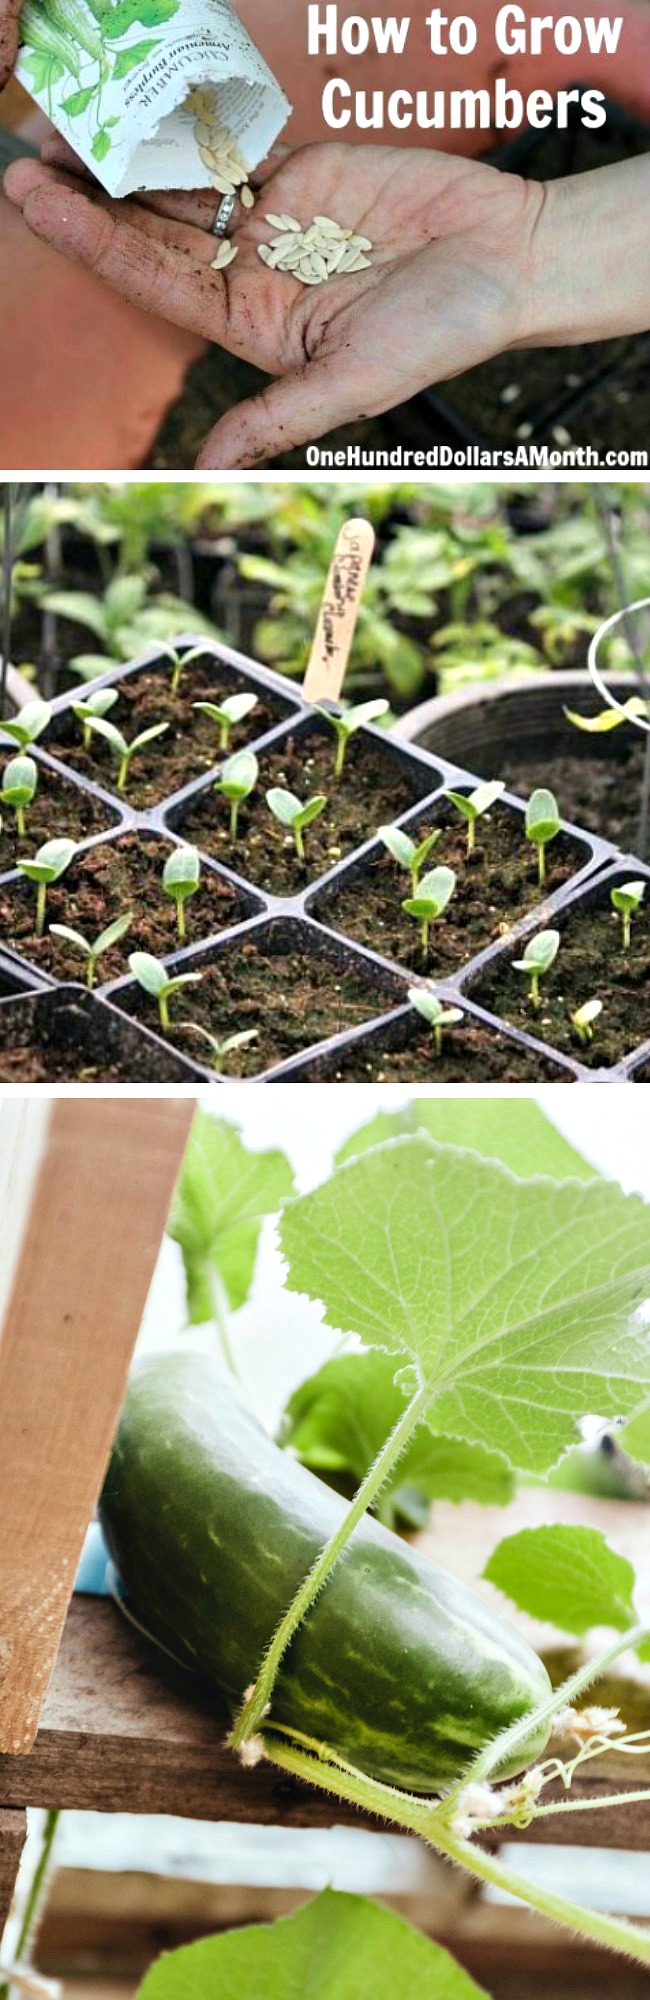 How to Grow Cucumbers {Start to Finish}